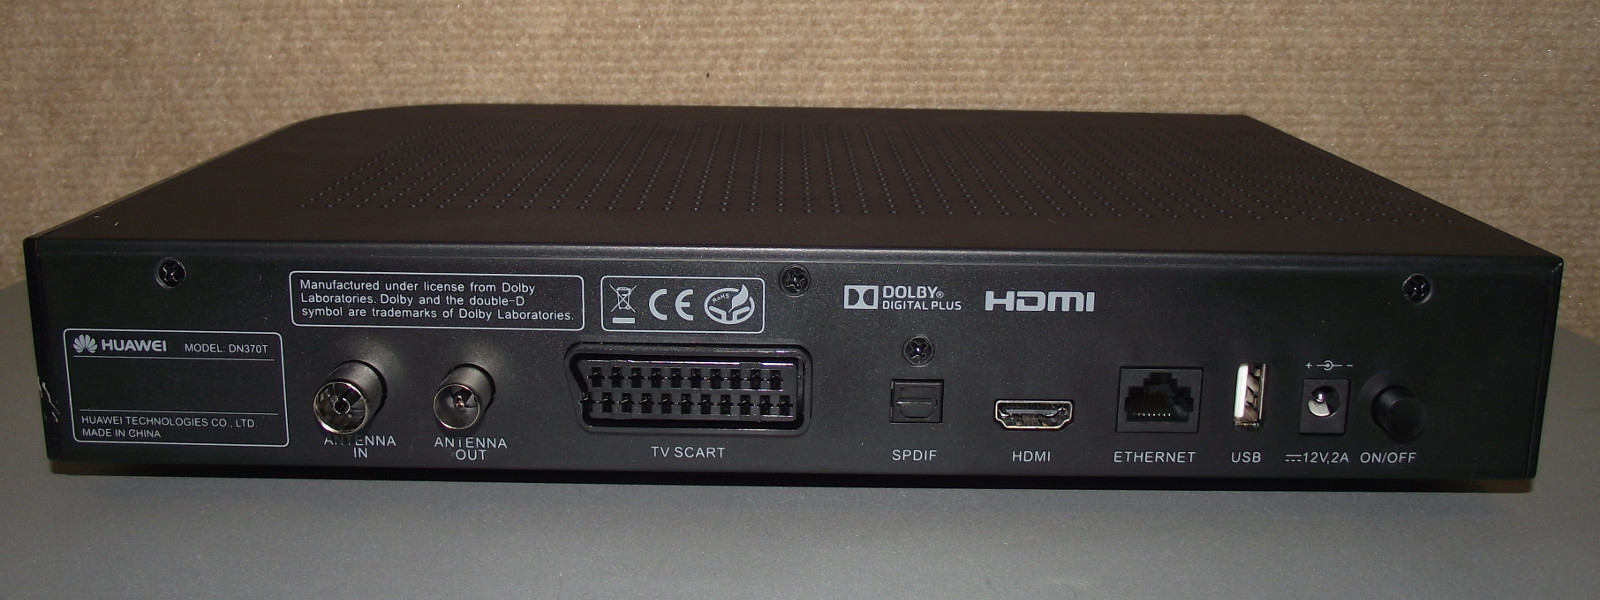 will talktalk youview box work without subscription